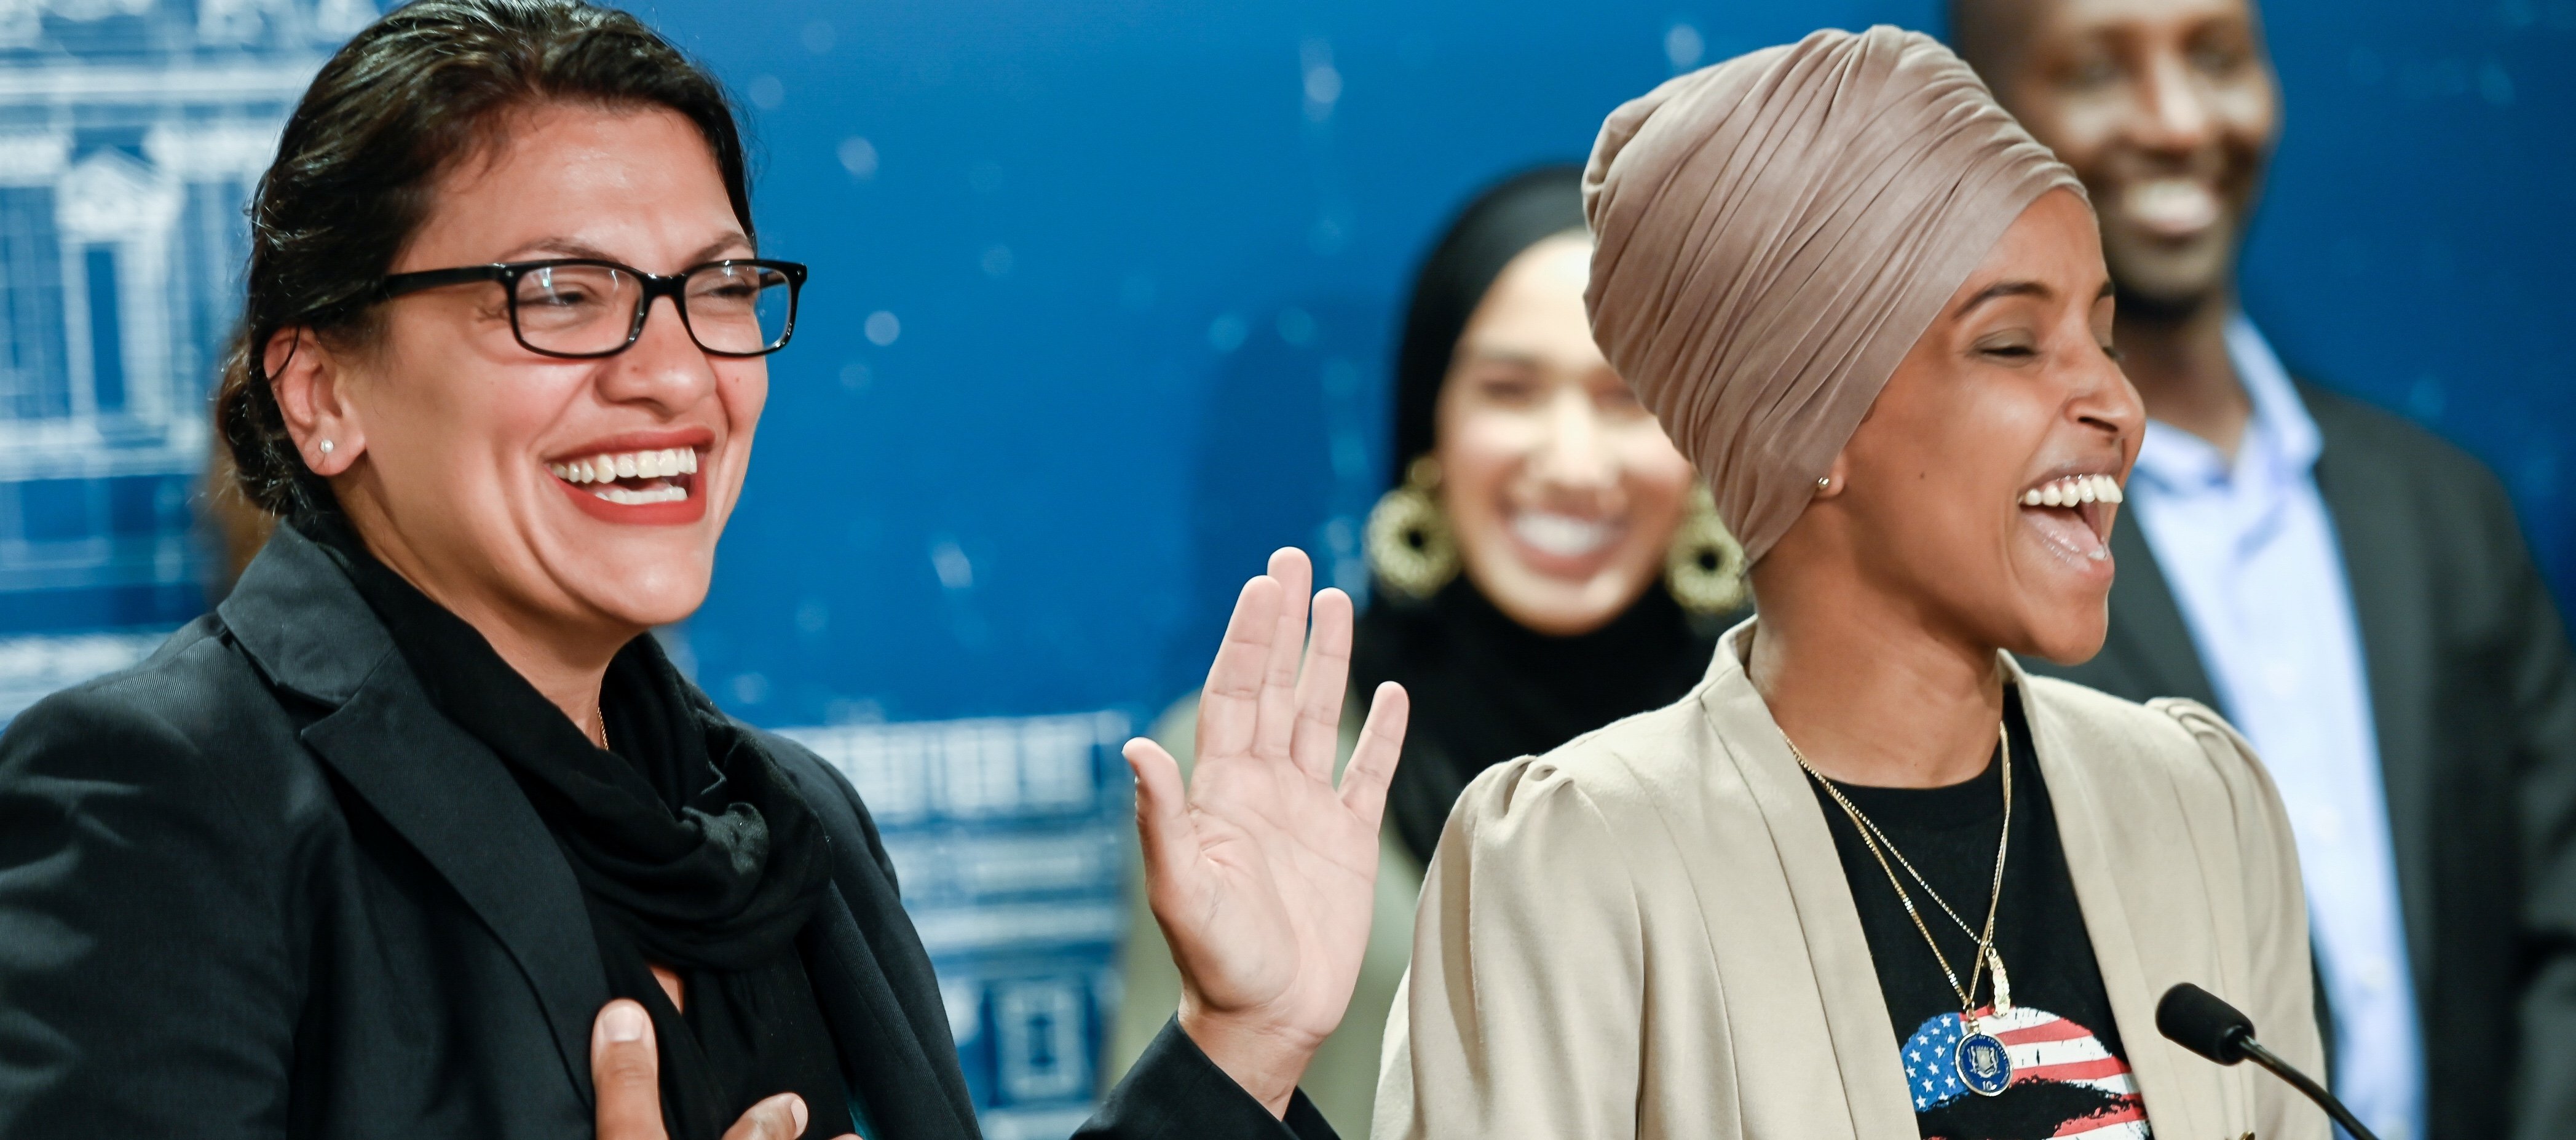 U.S. Representatives Rashida Tlaib (D-MI) and Ilhan Omar (D-MN) react as they discuss travel restrictions to Palestine and Israel during a news conference at the Minnesota State Capitol Building in St Paul, Minnesota, August 19, 2019. REUTERS/Caroline Yang